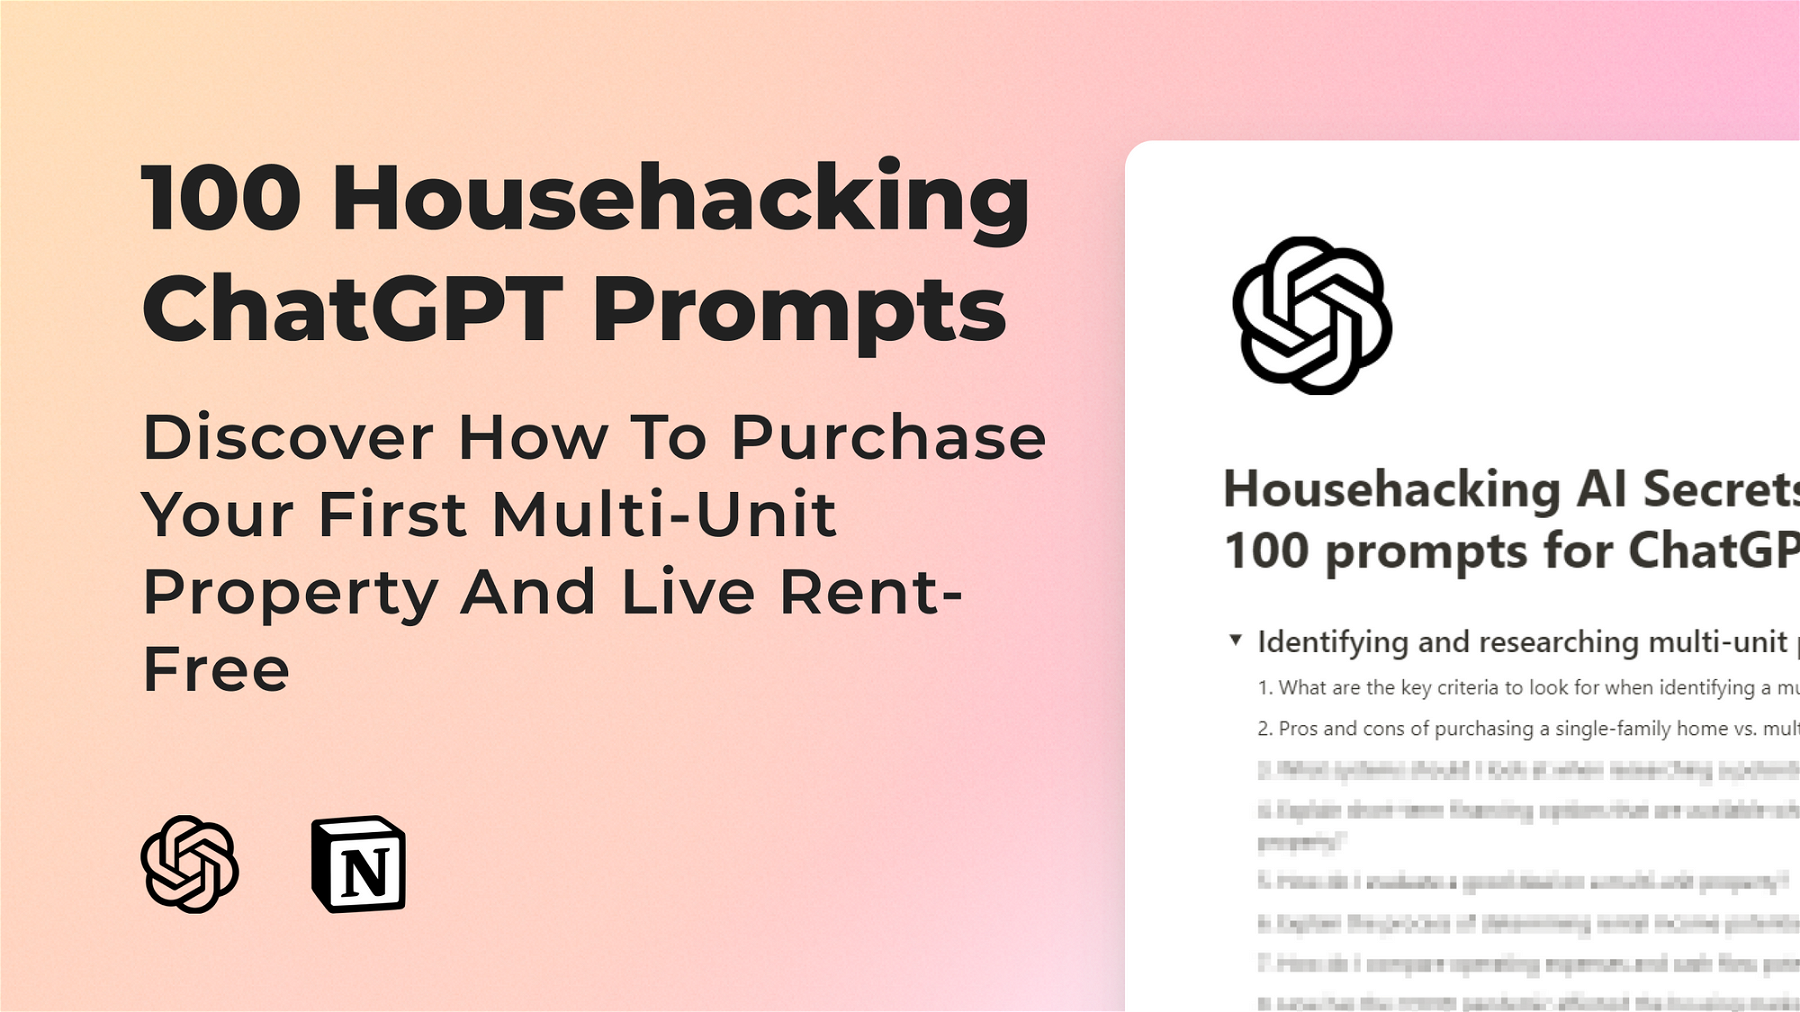 Househacking AI Secrets: 100 prompts for ChatGPT